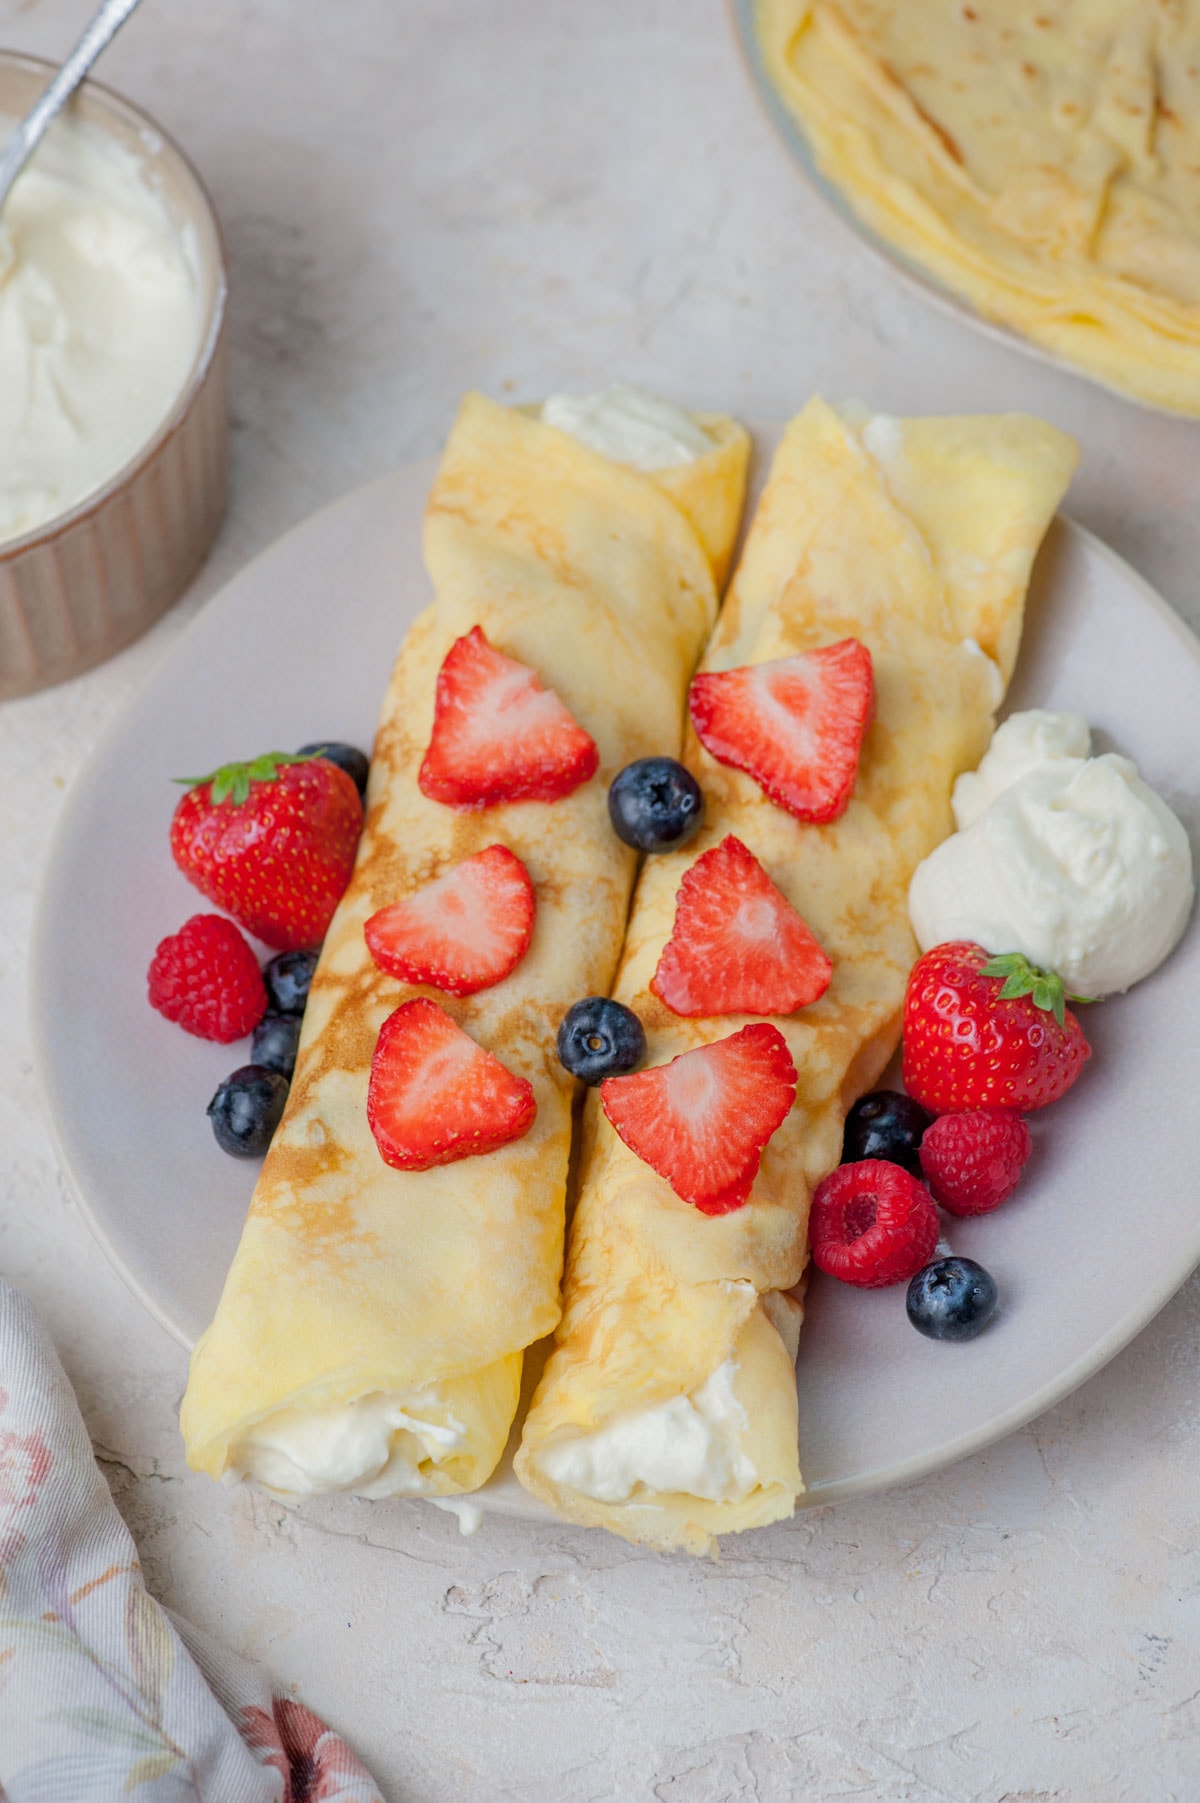 Rolled up creped filled with cream cheese filling and topped with berries on a plate.